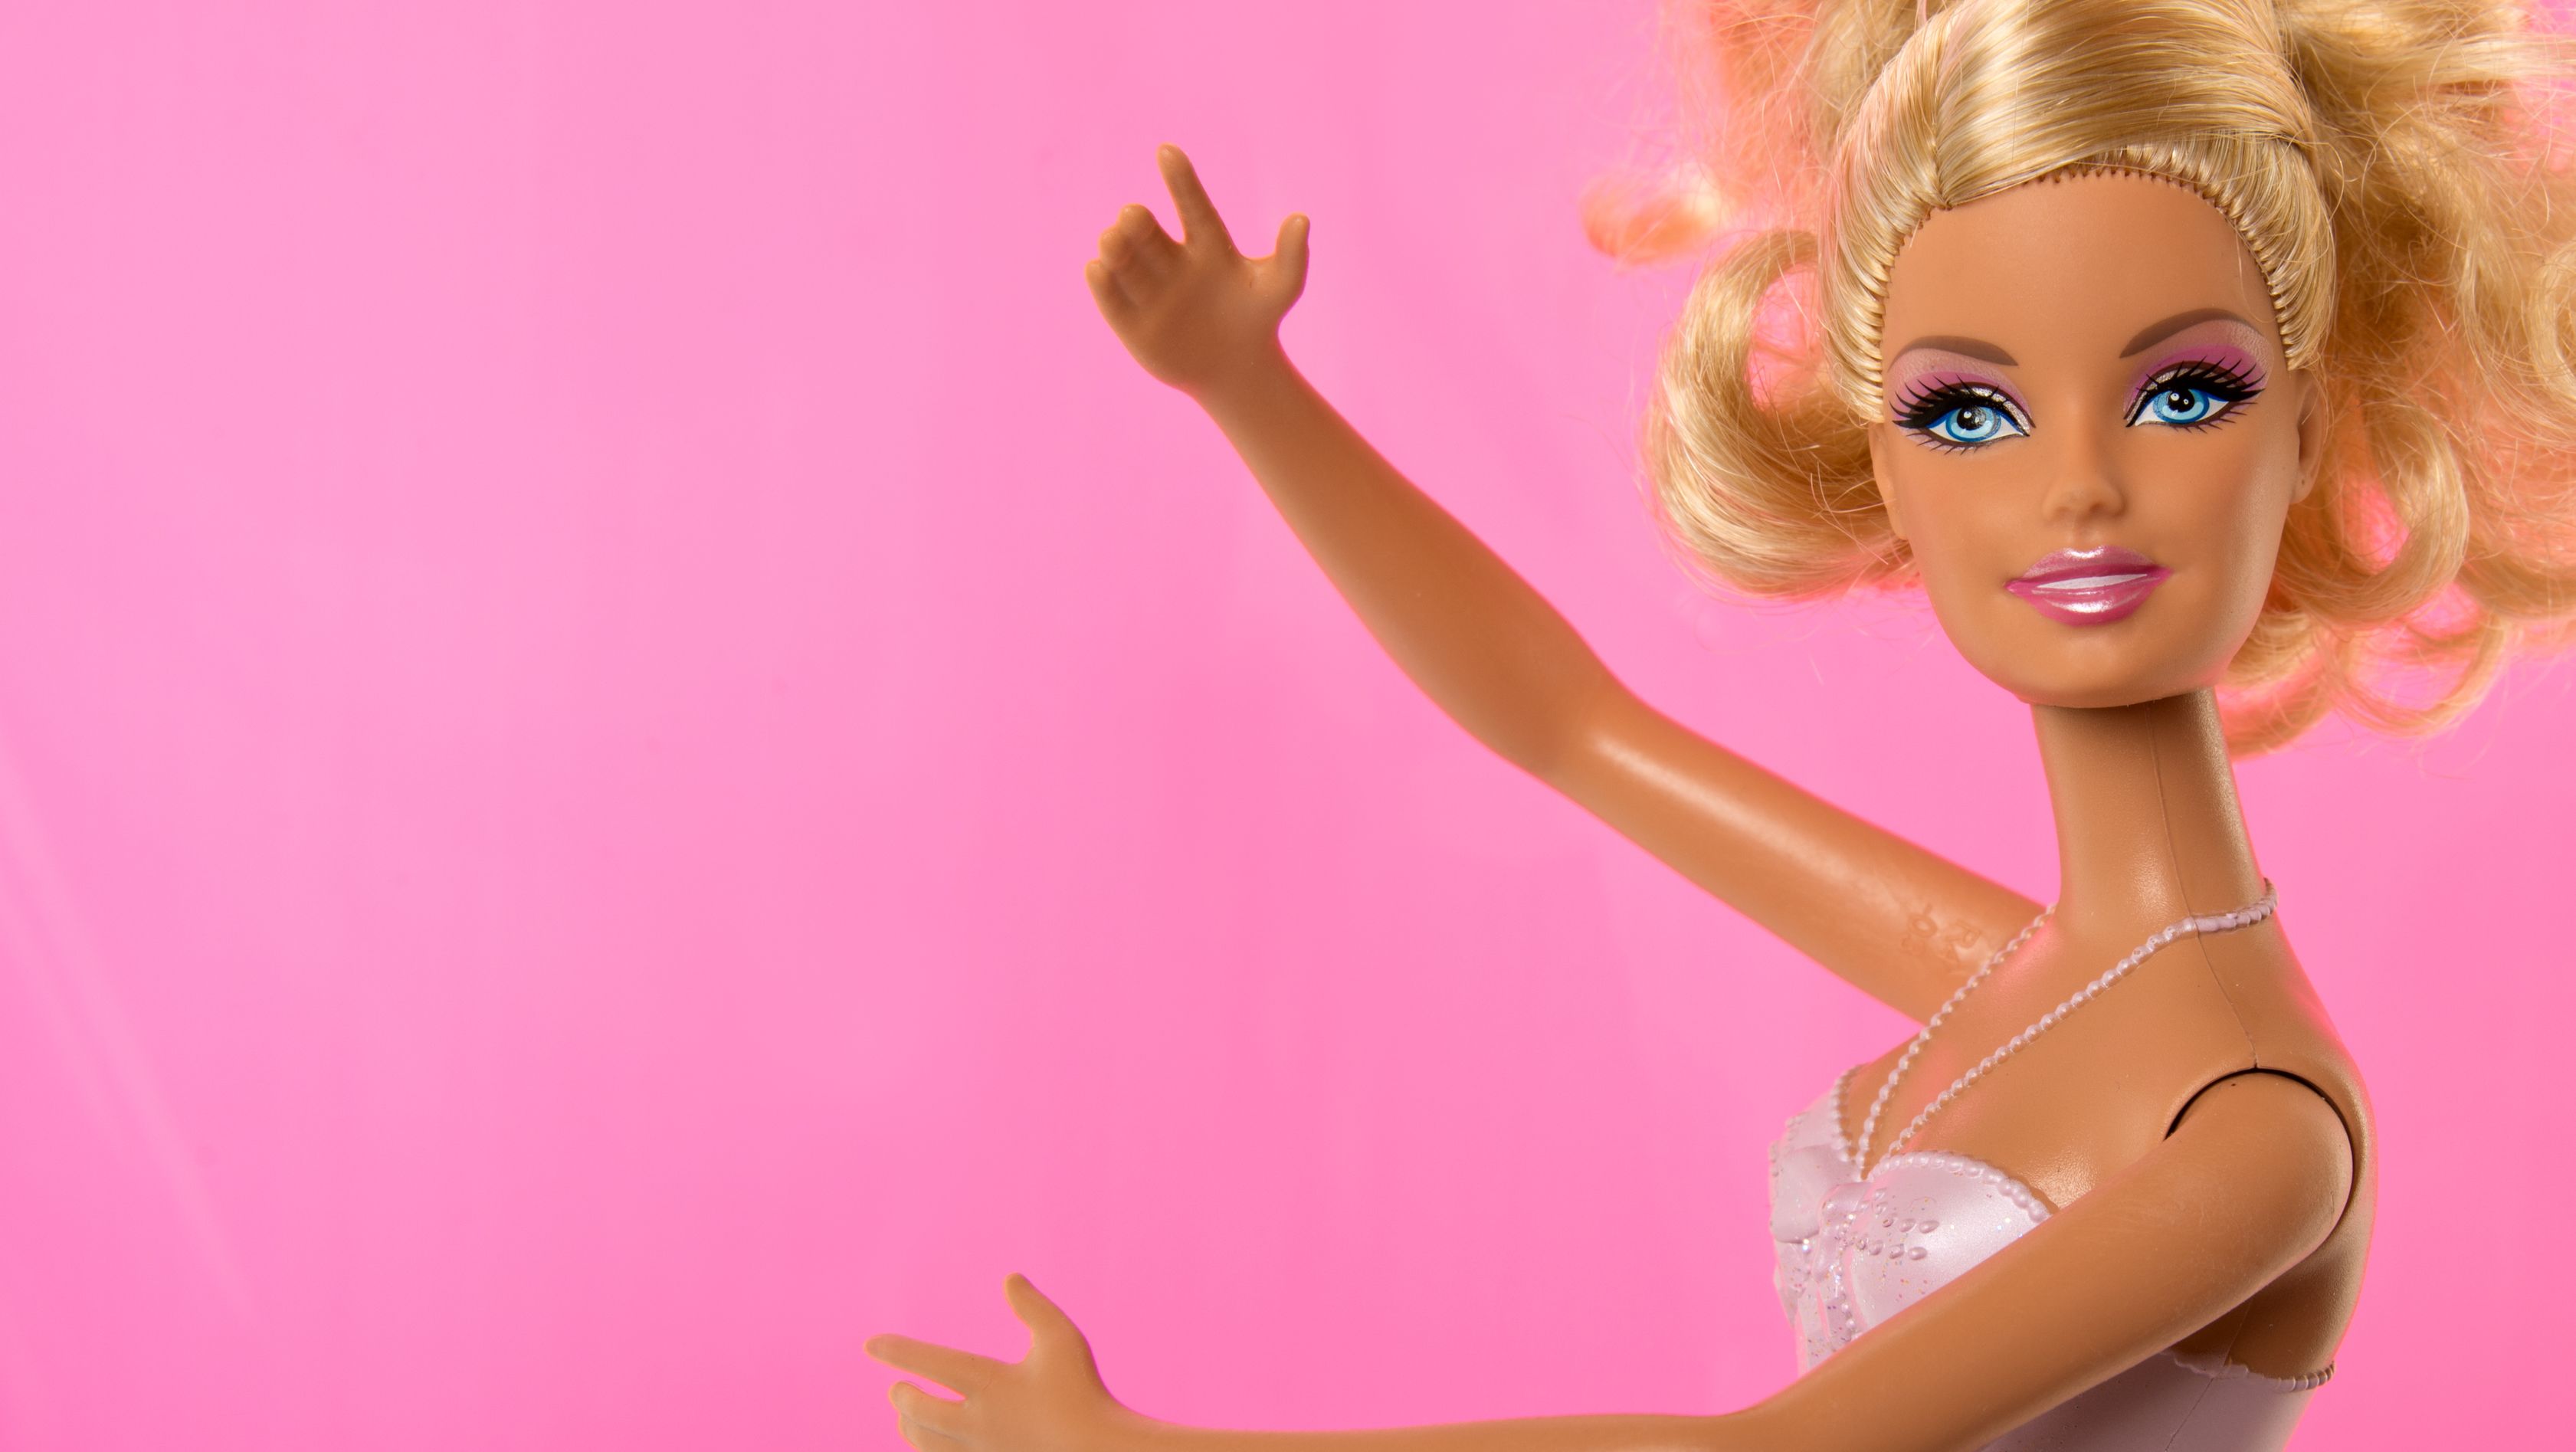 11 Fun Facts About Barbie | Mental Floss